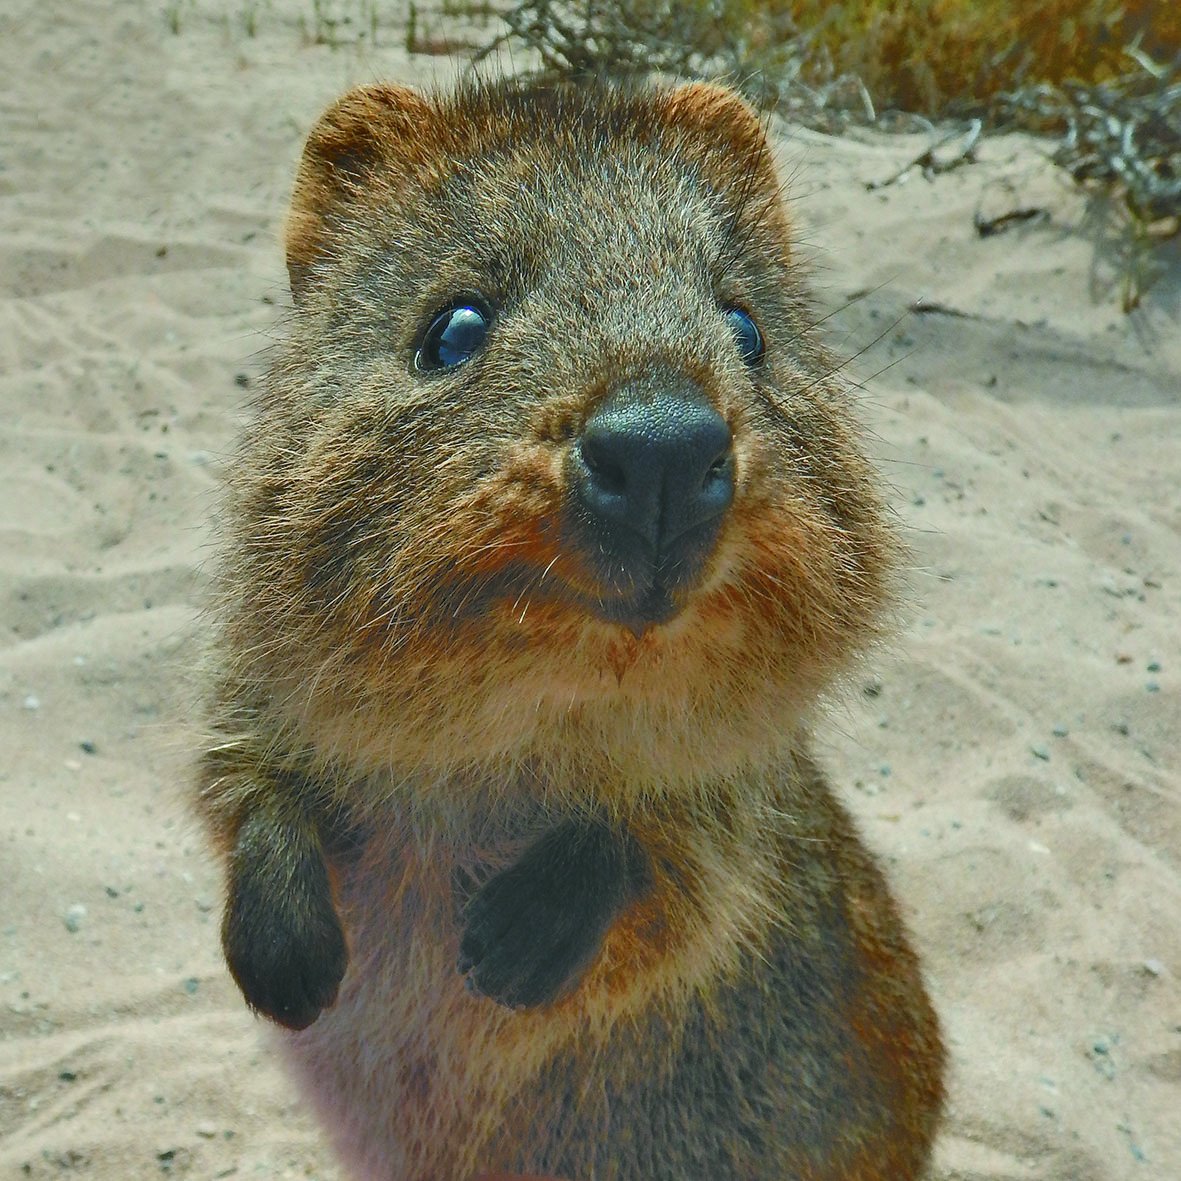 Our quokkas are the happiest animals on earth and always ready for a selfie! @TheEllenShow we know you take a great Oscar selfie, we’d love to see if you can beat @chrishemsworth at a #quokkaselfie with our little celebrities.